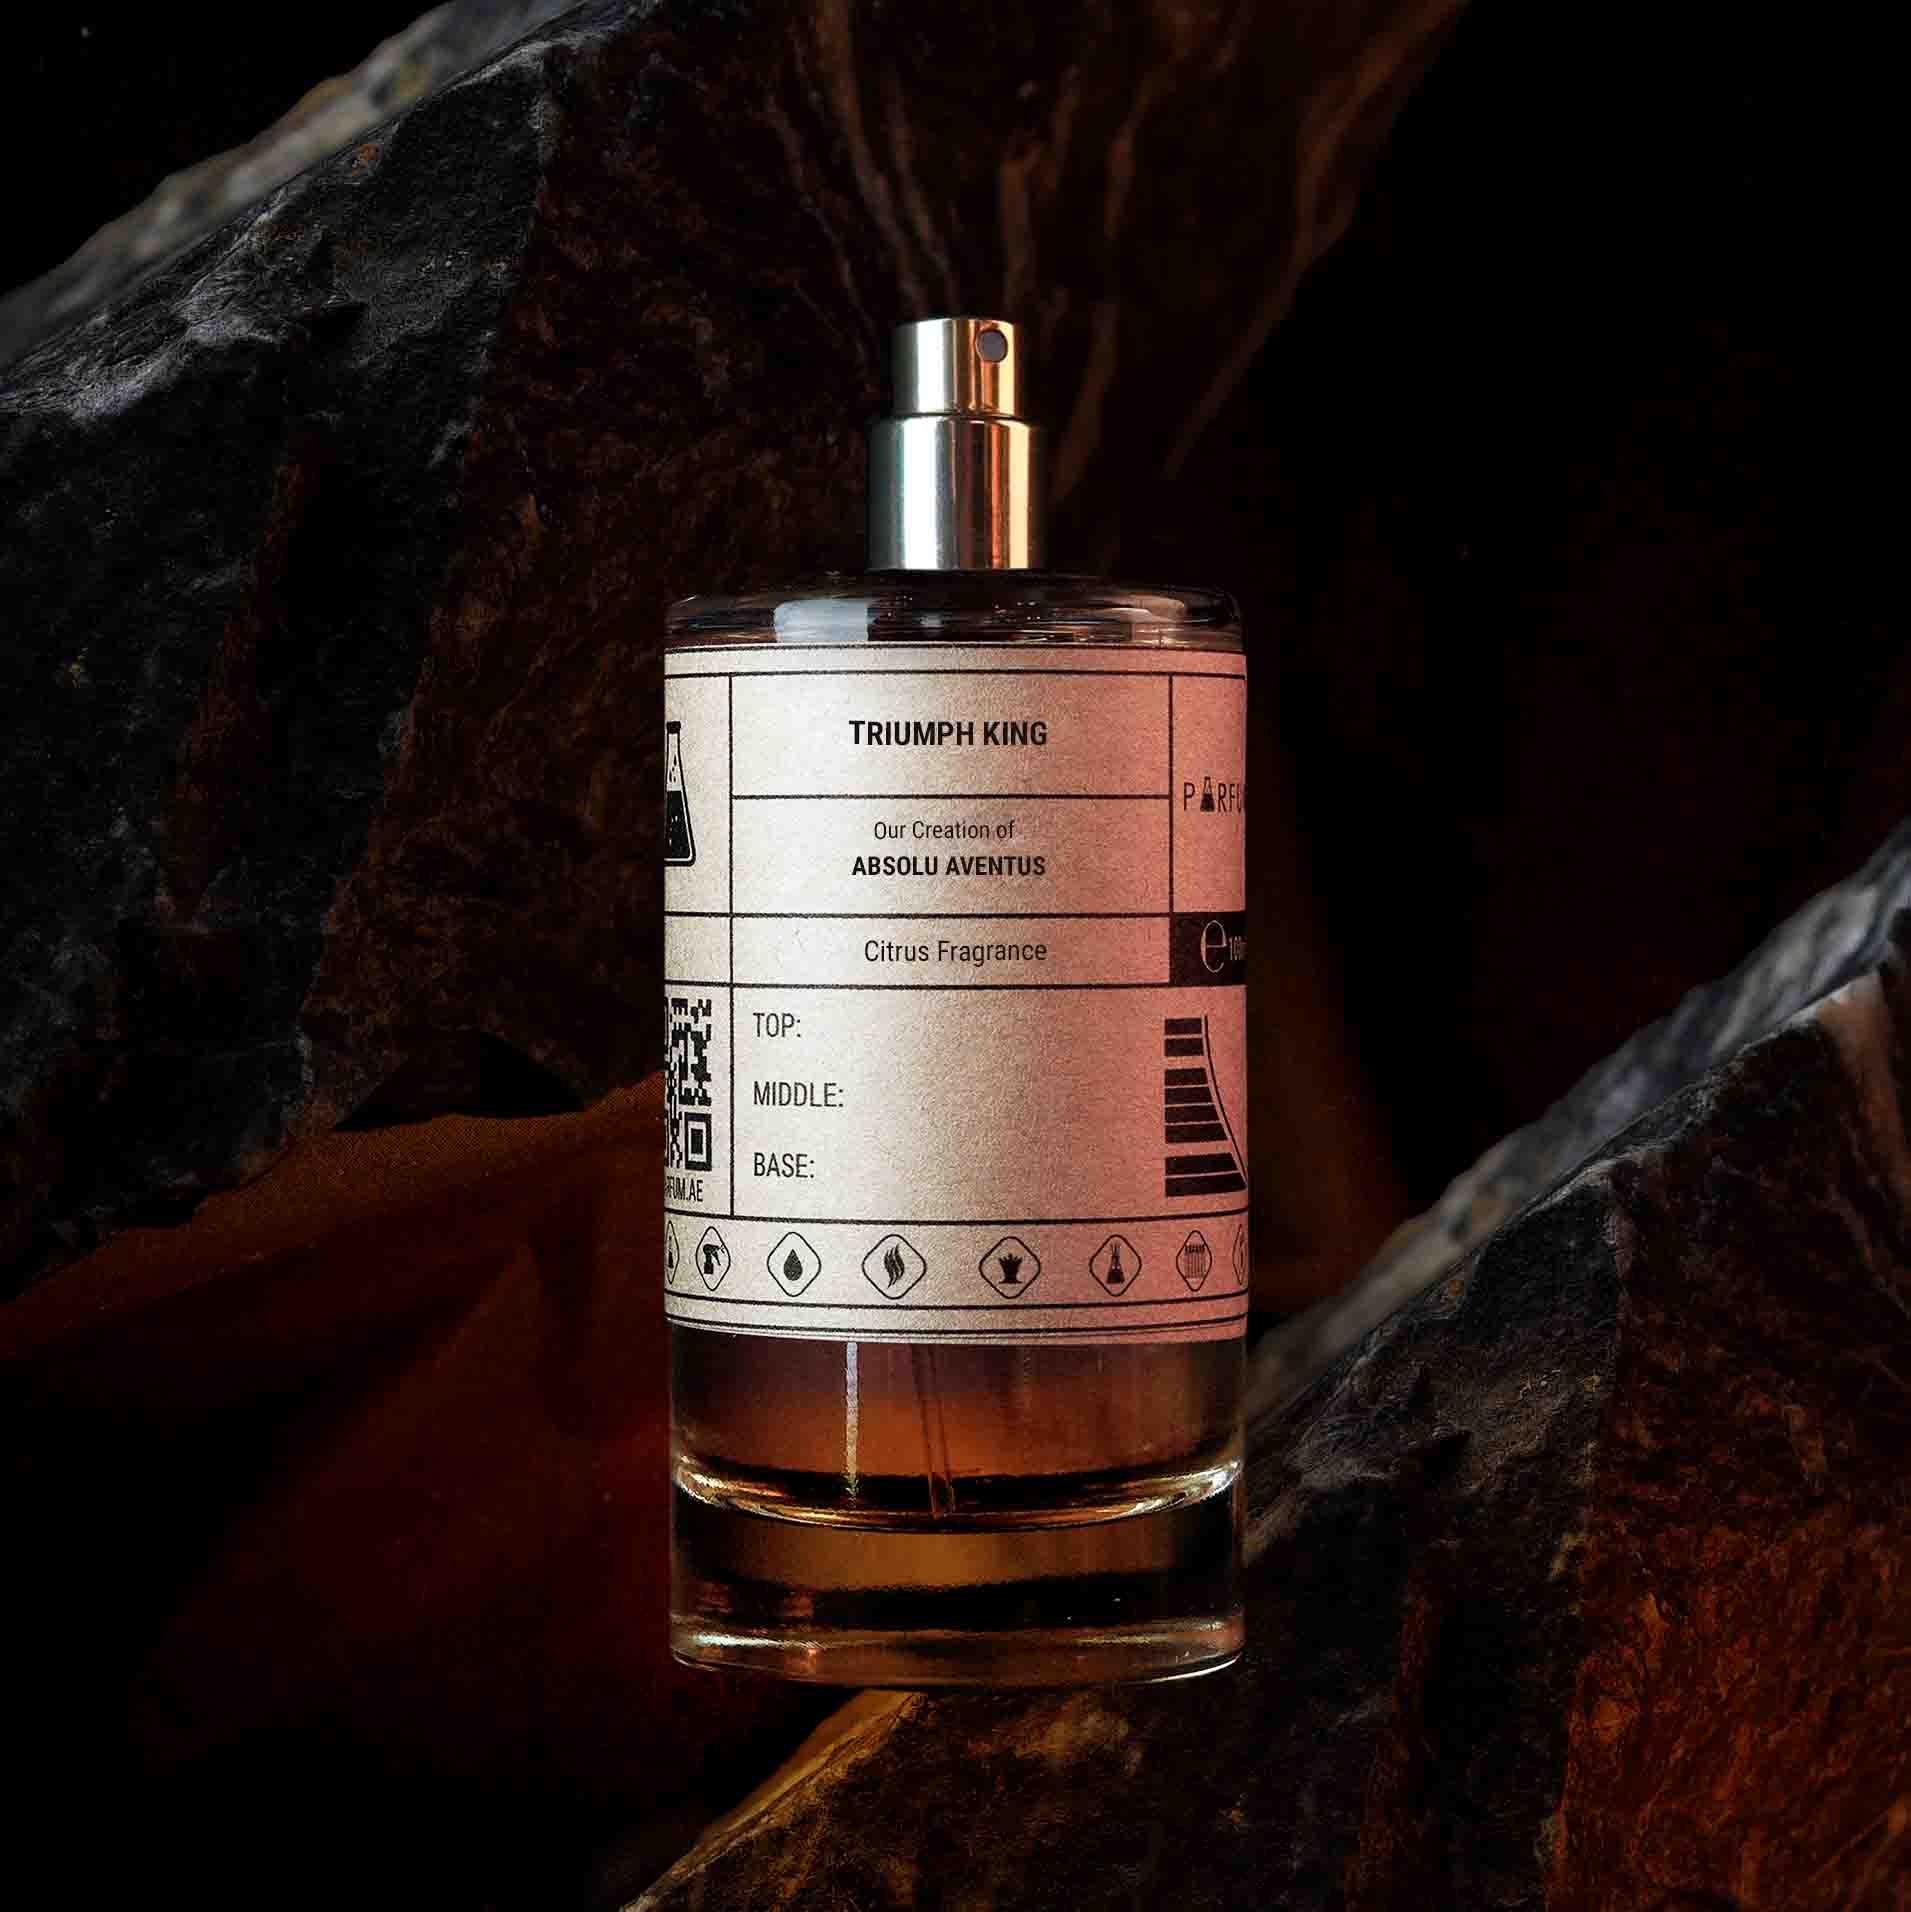 Our Creation of Creed's Absolu Aventus